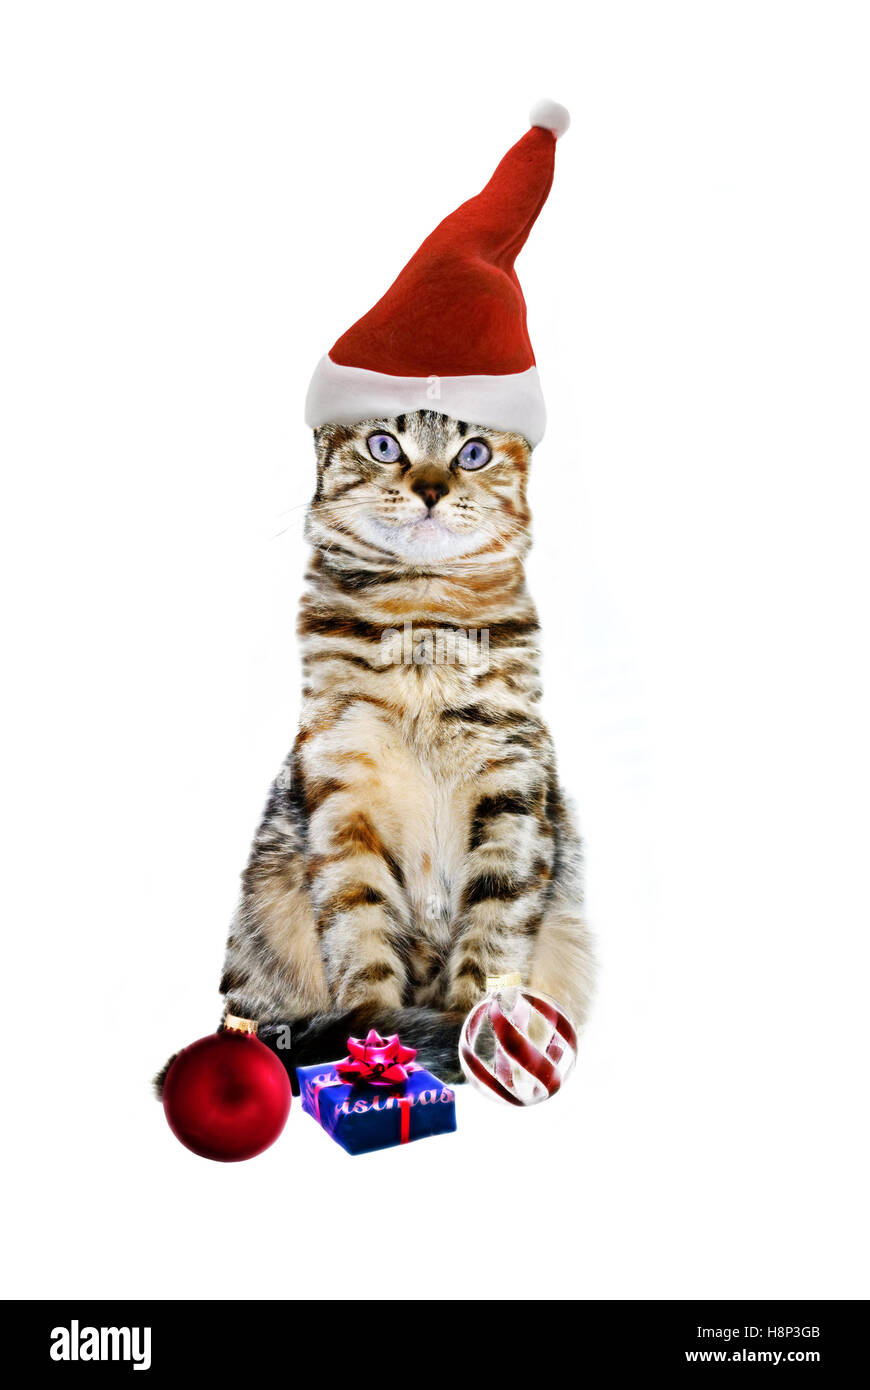 Pretty Tabby Cat with Christmas Decorations. Stock Photo